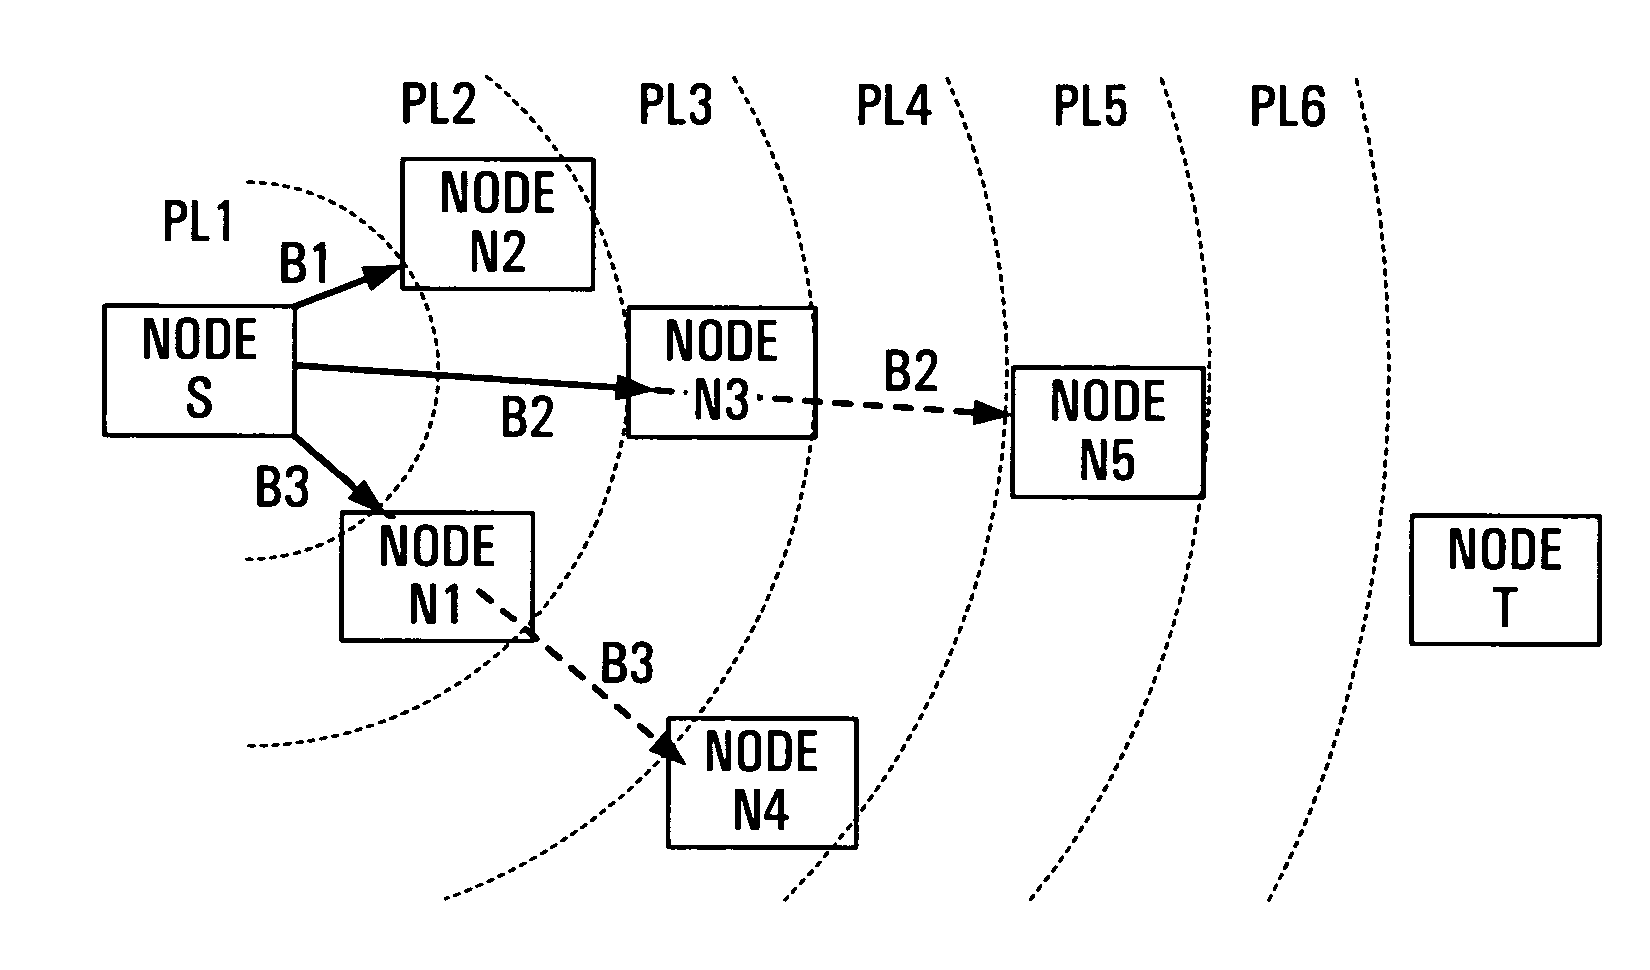 Path selection in wireless networks